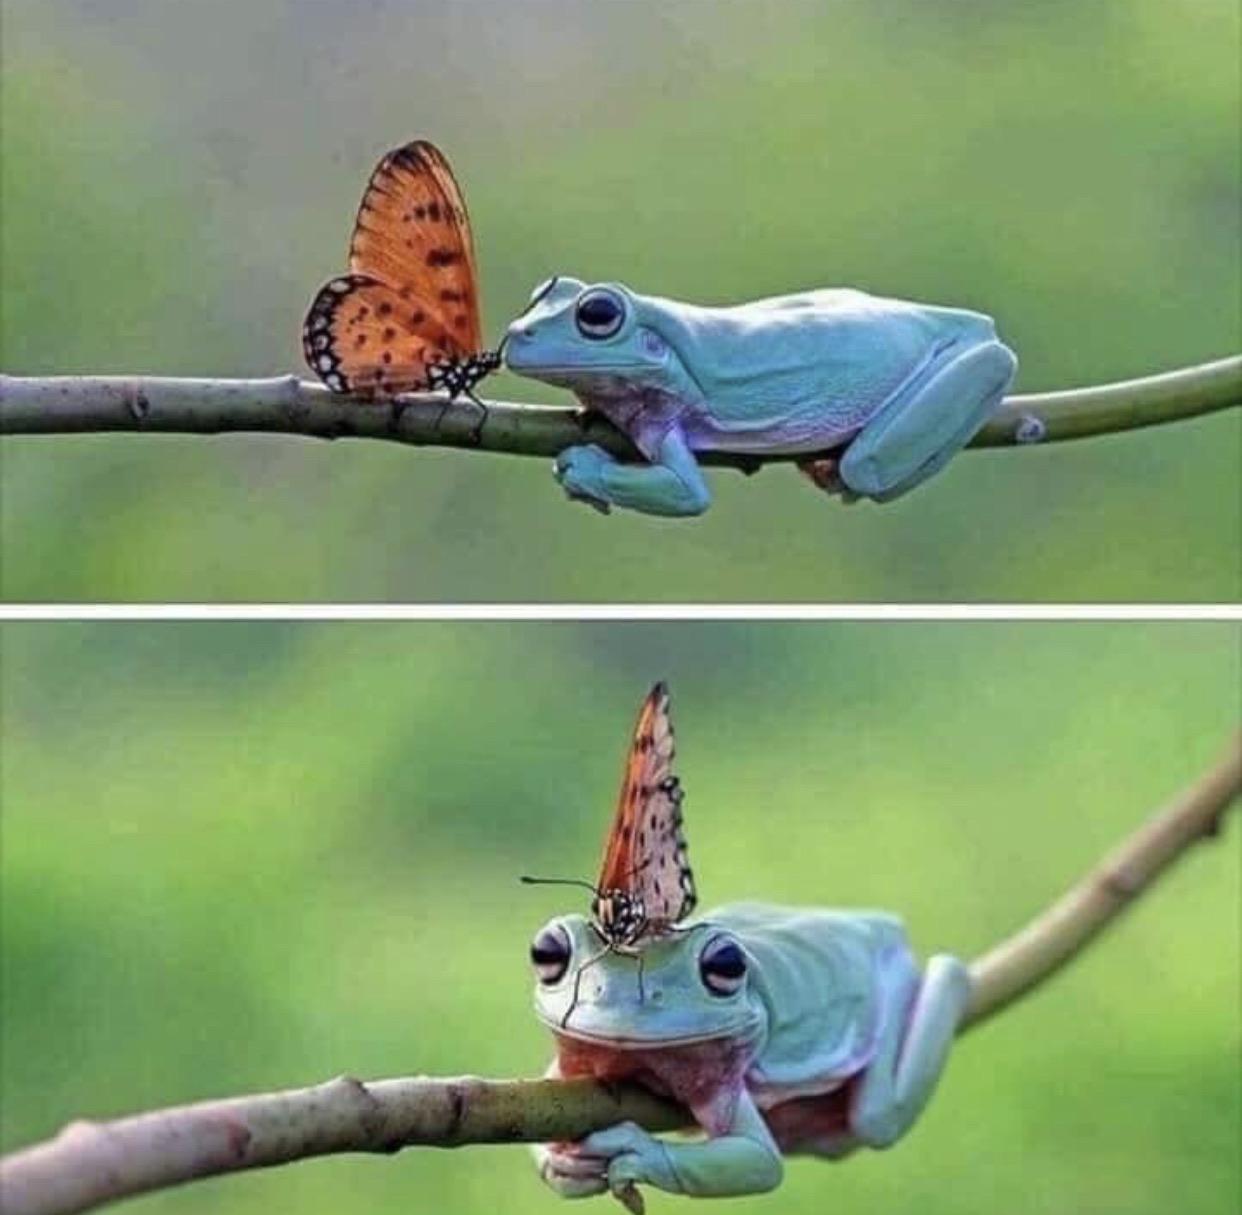 The frog and the butterfly